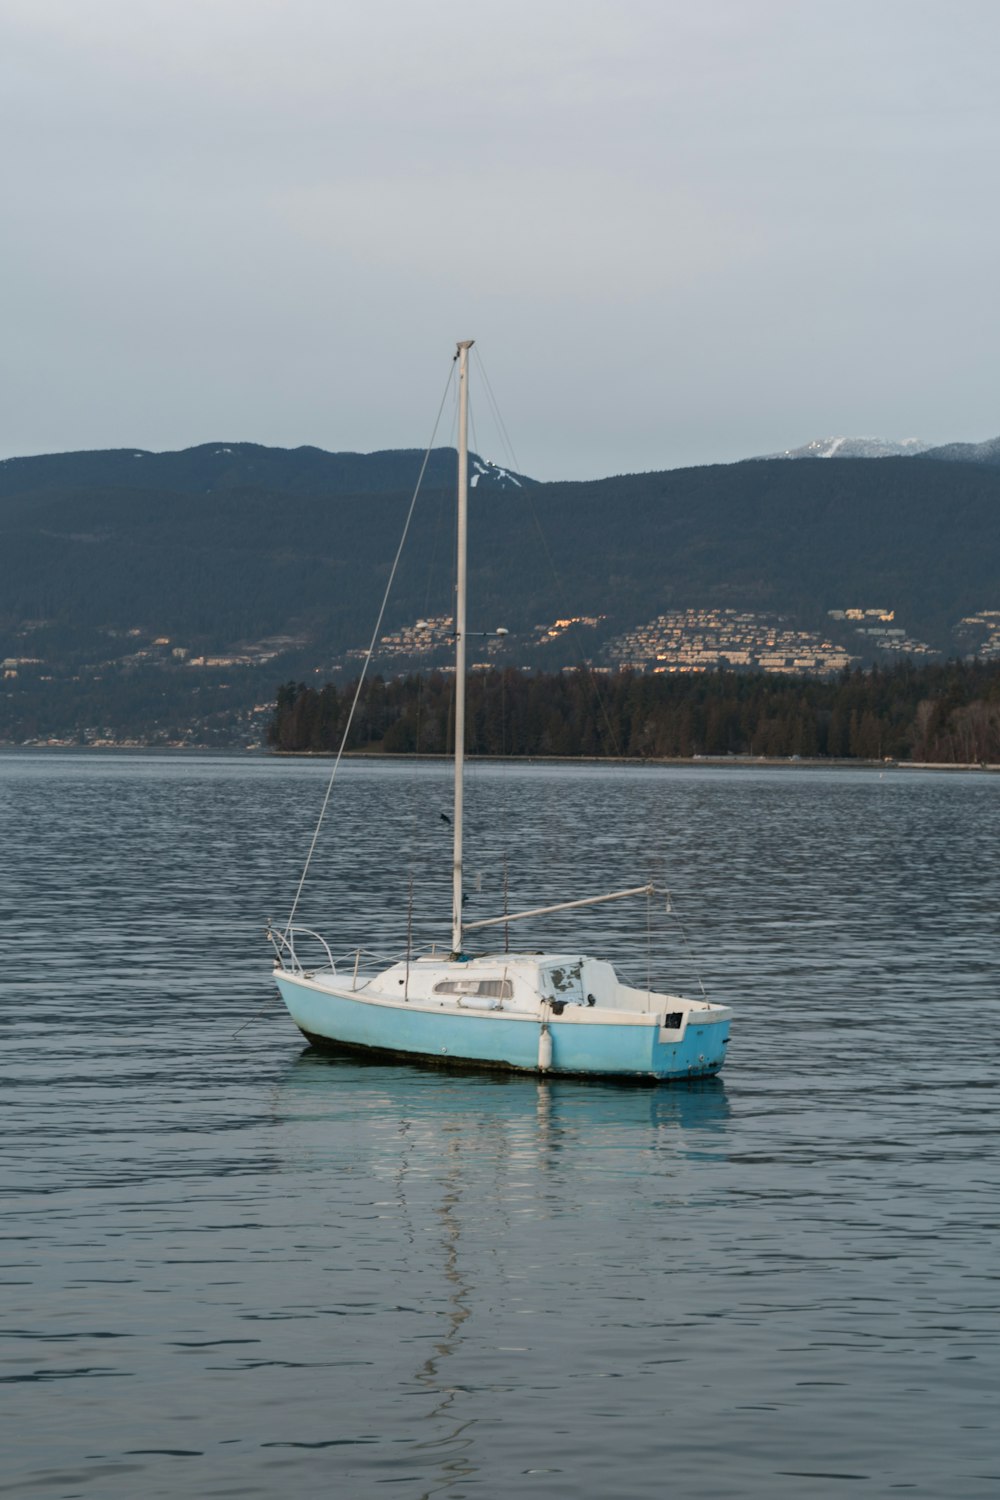 a sailboat floating on a lake with mountains in the background